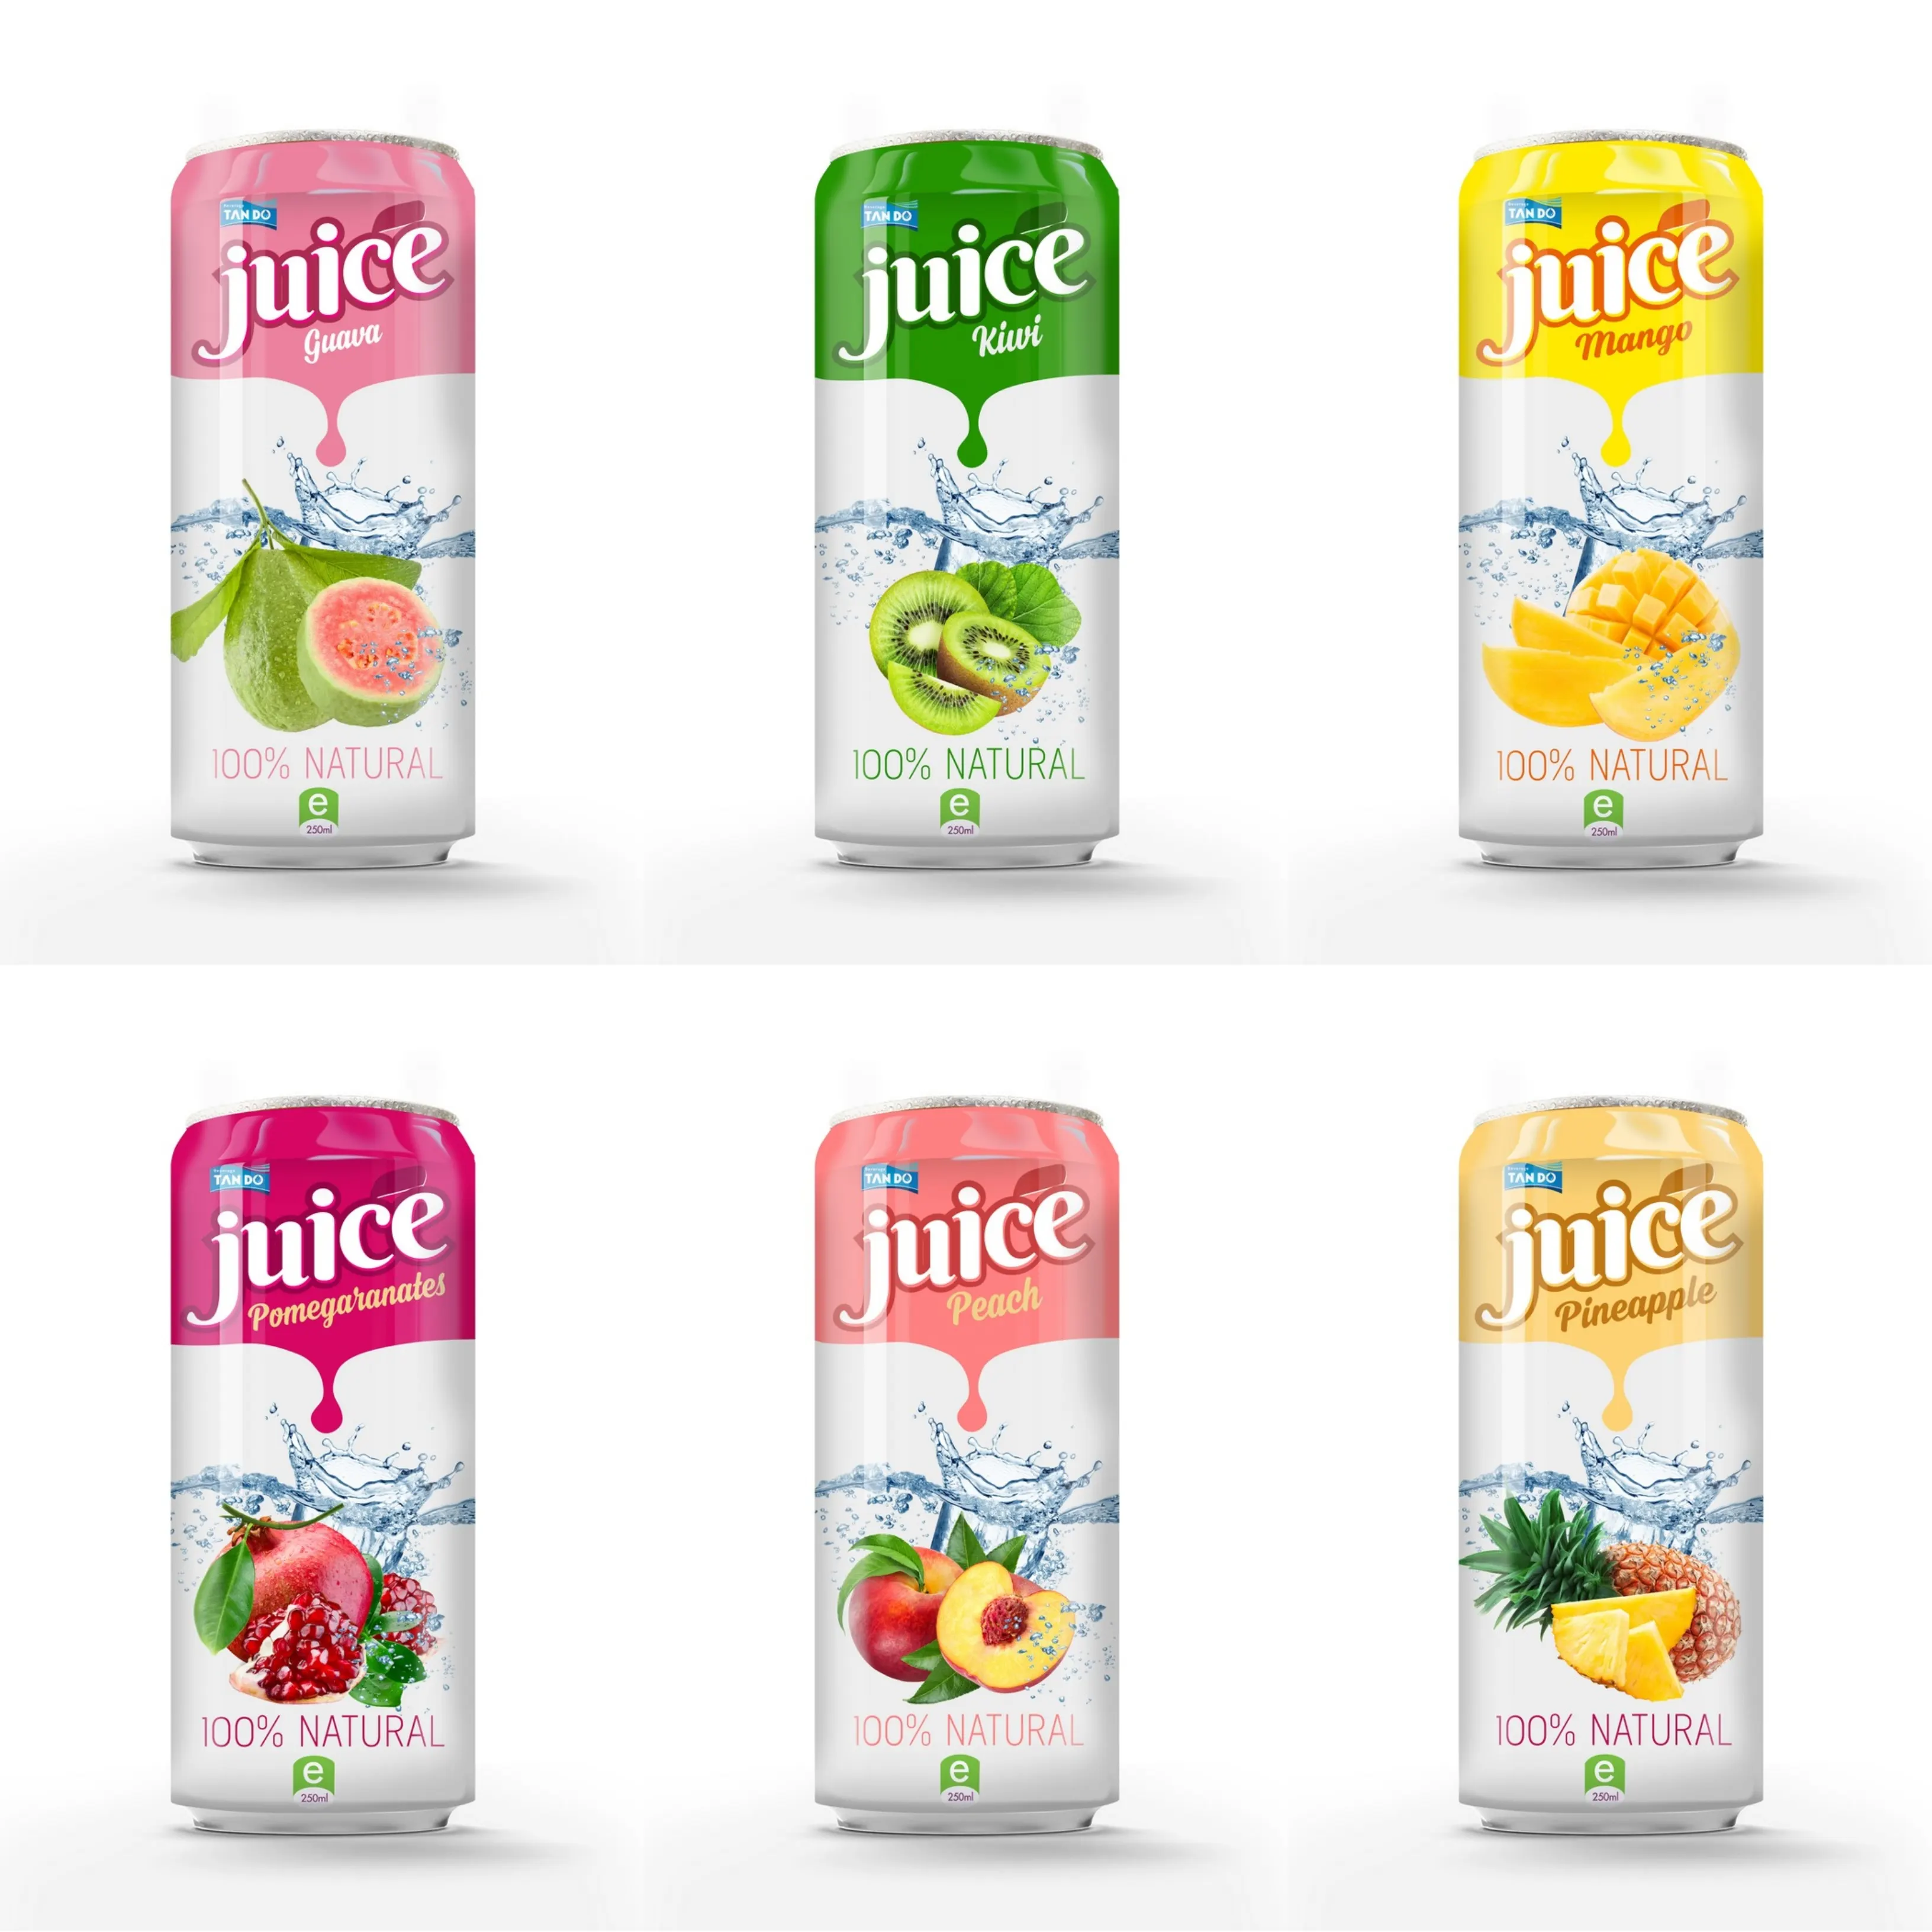 Wholesale/Private label Tropical Pure Fruit Juice Drink 250ml Can from Vietnam - Free Sample - Cheap price - No added sugar